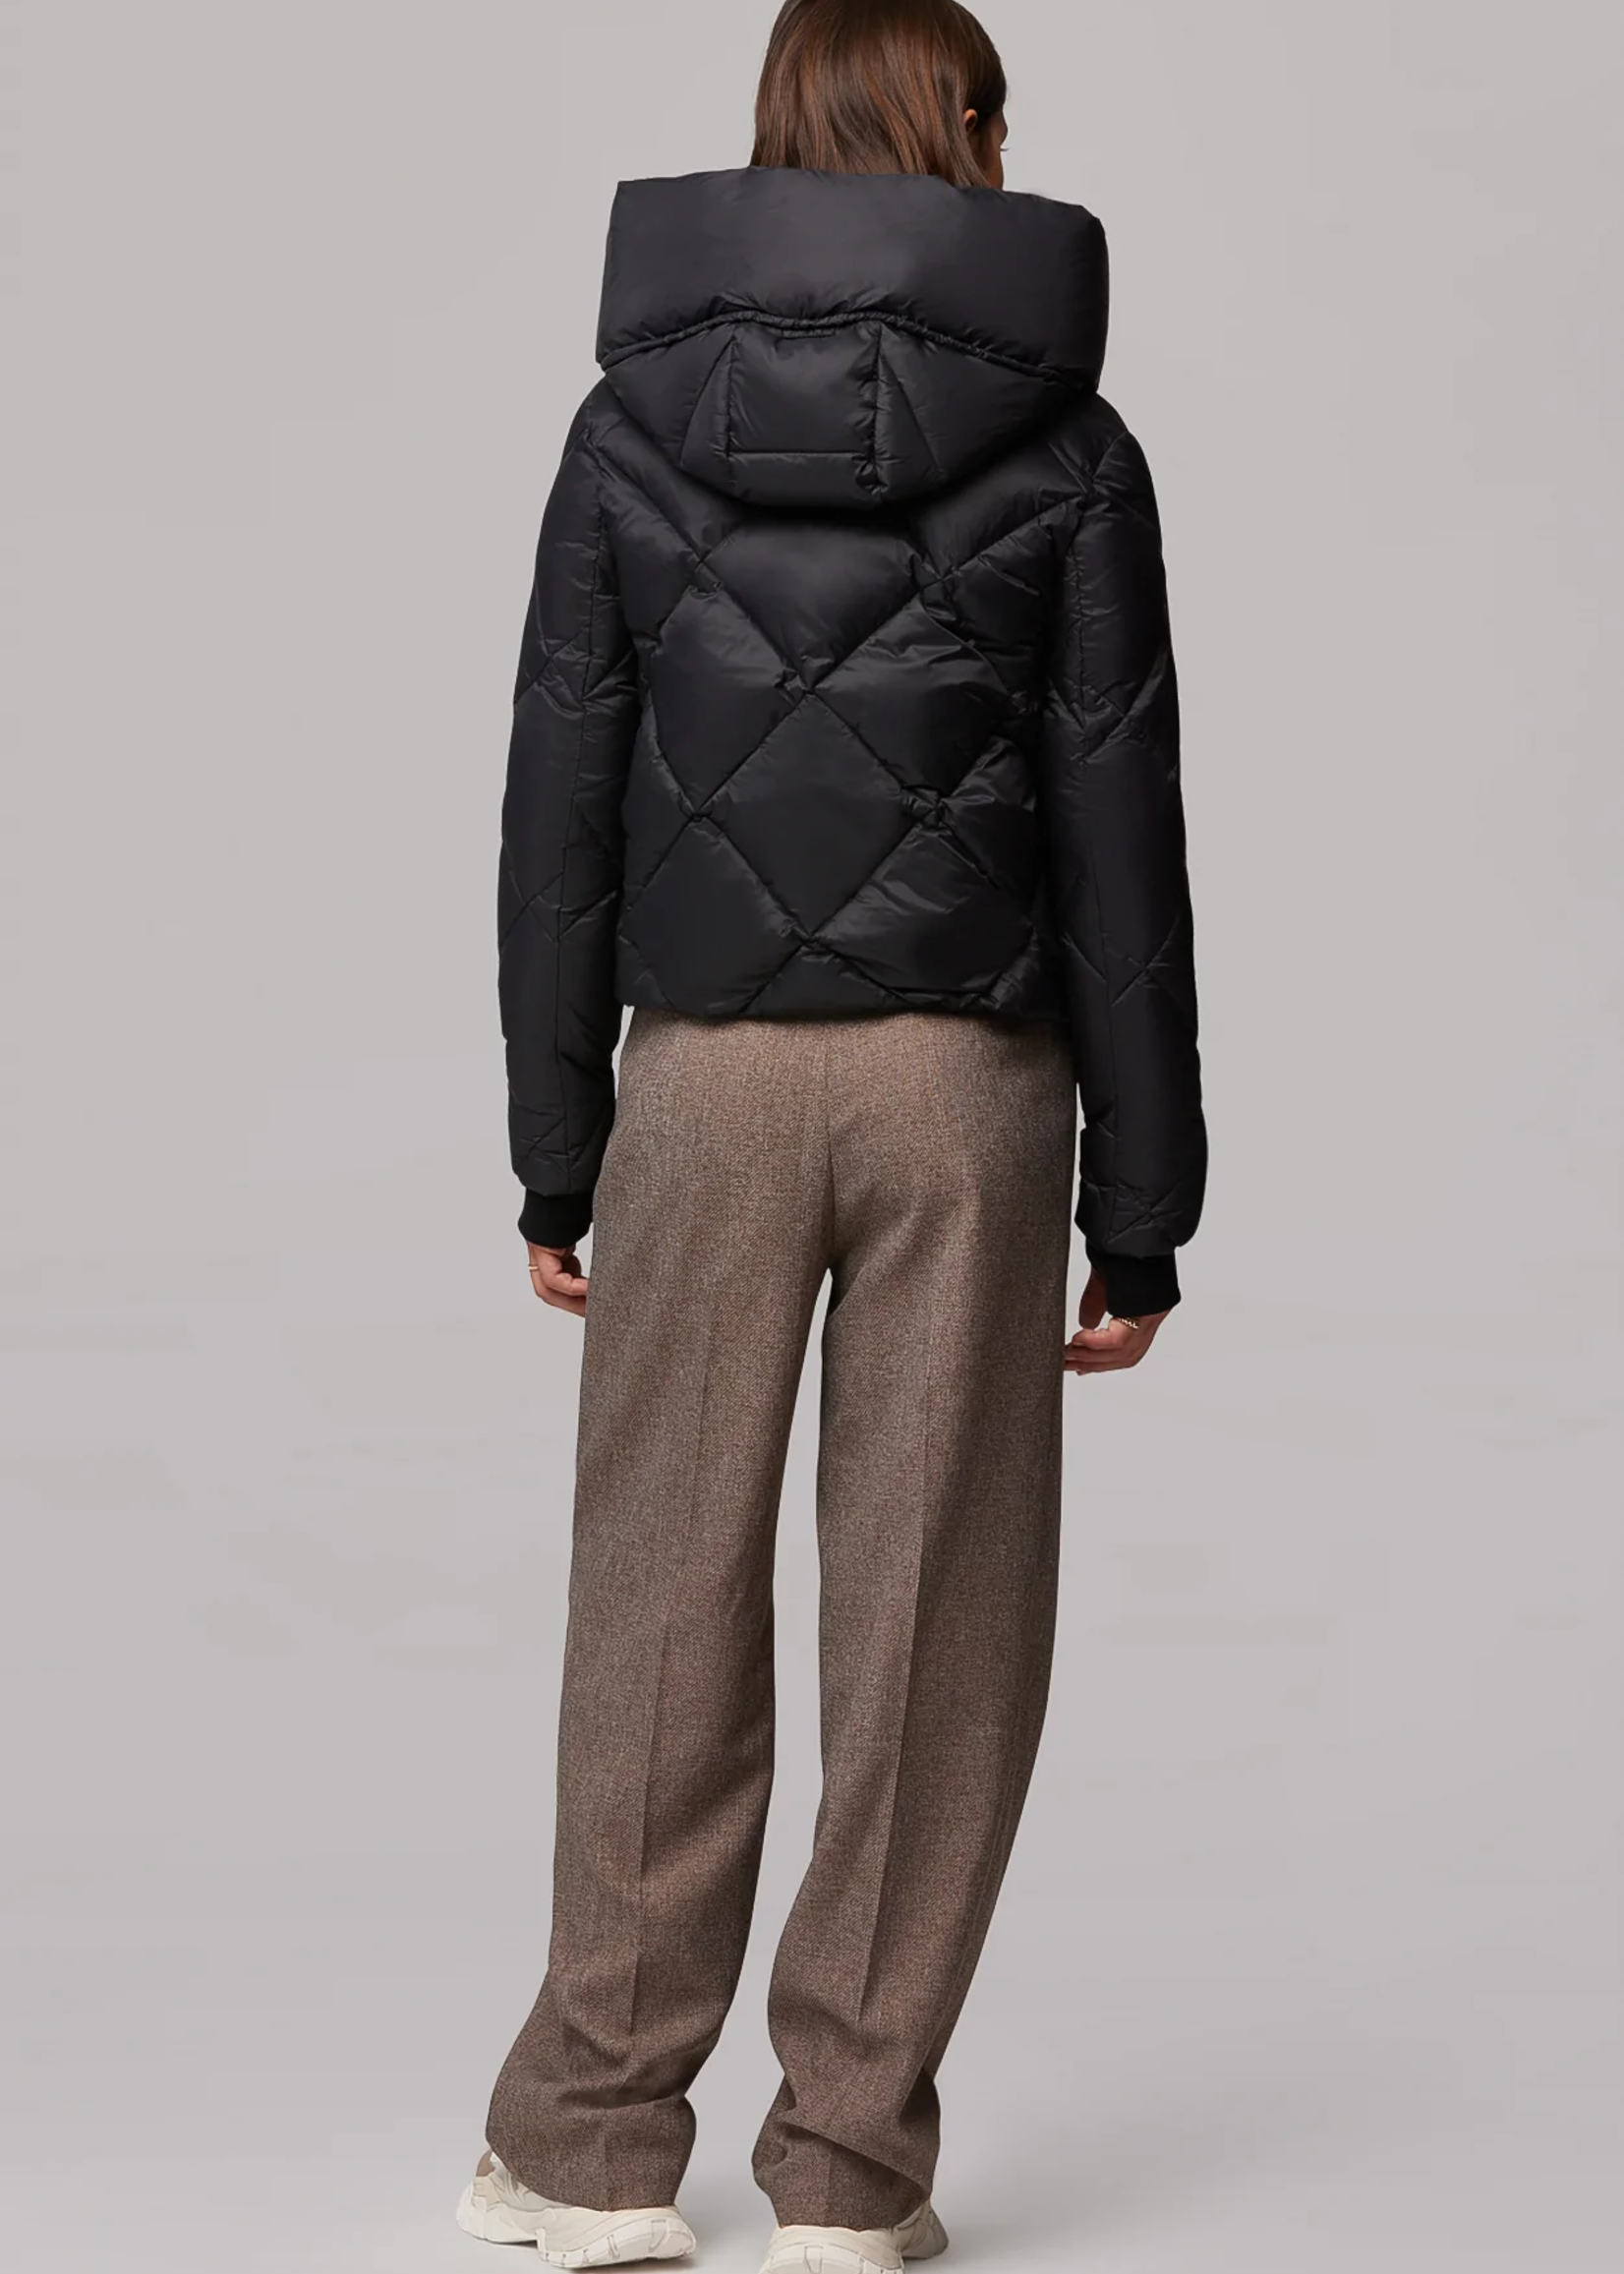 Soia & Kyo Mica Quilted Down Puffer Jacket